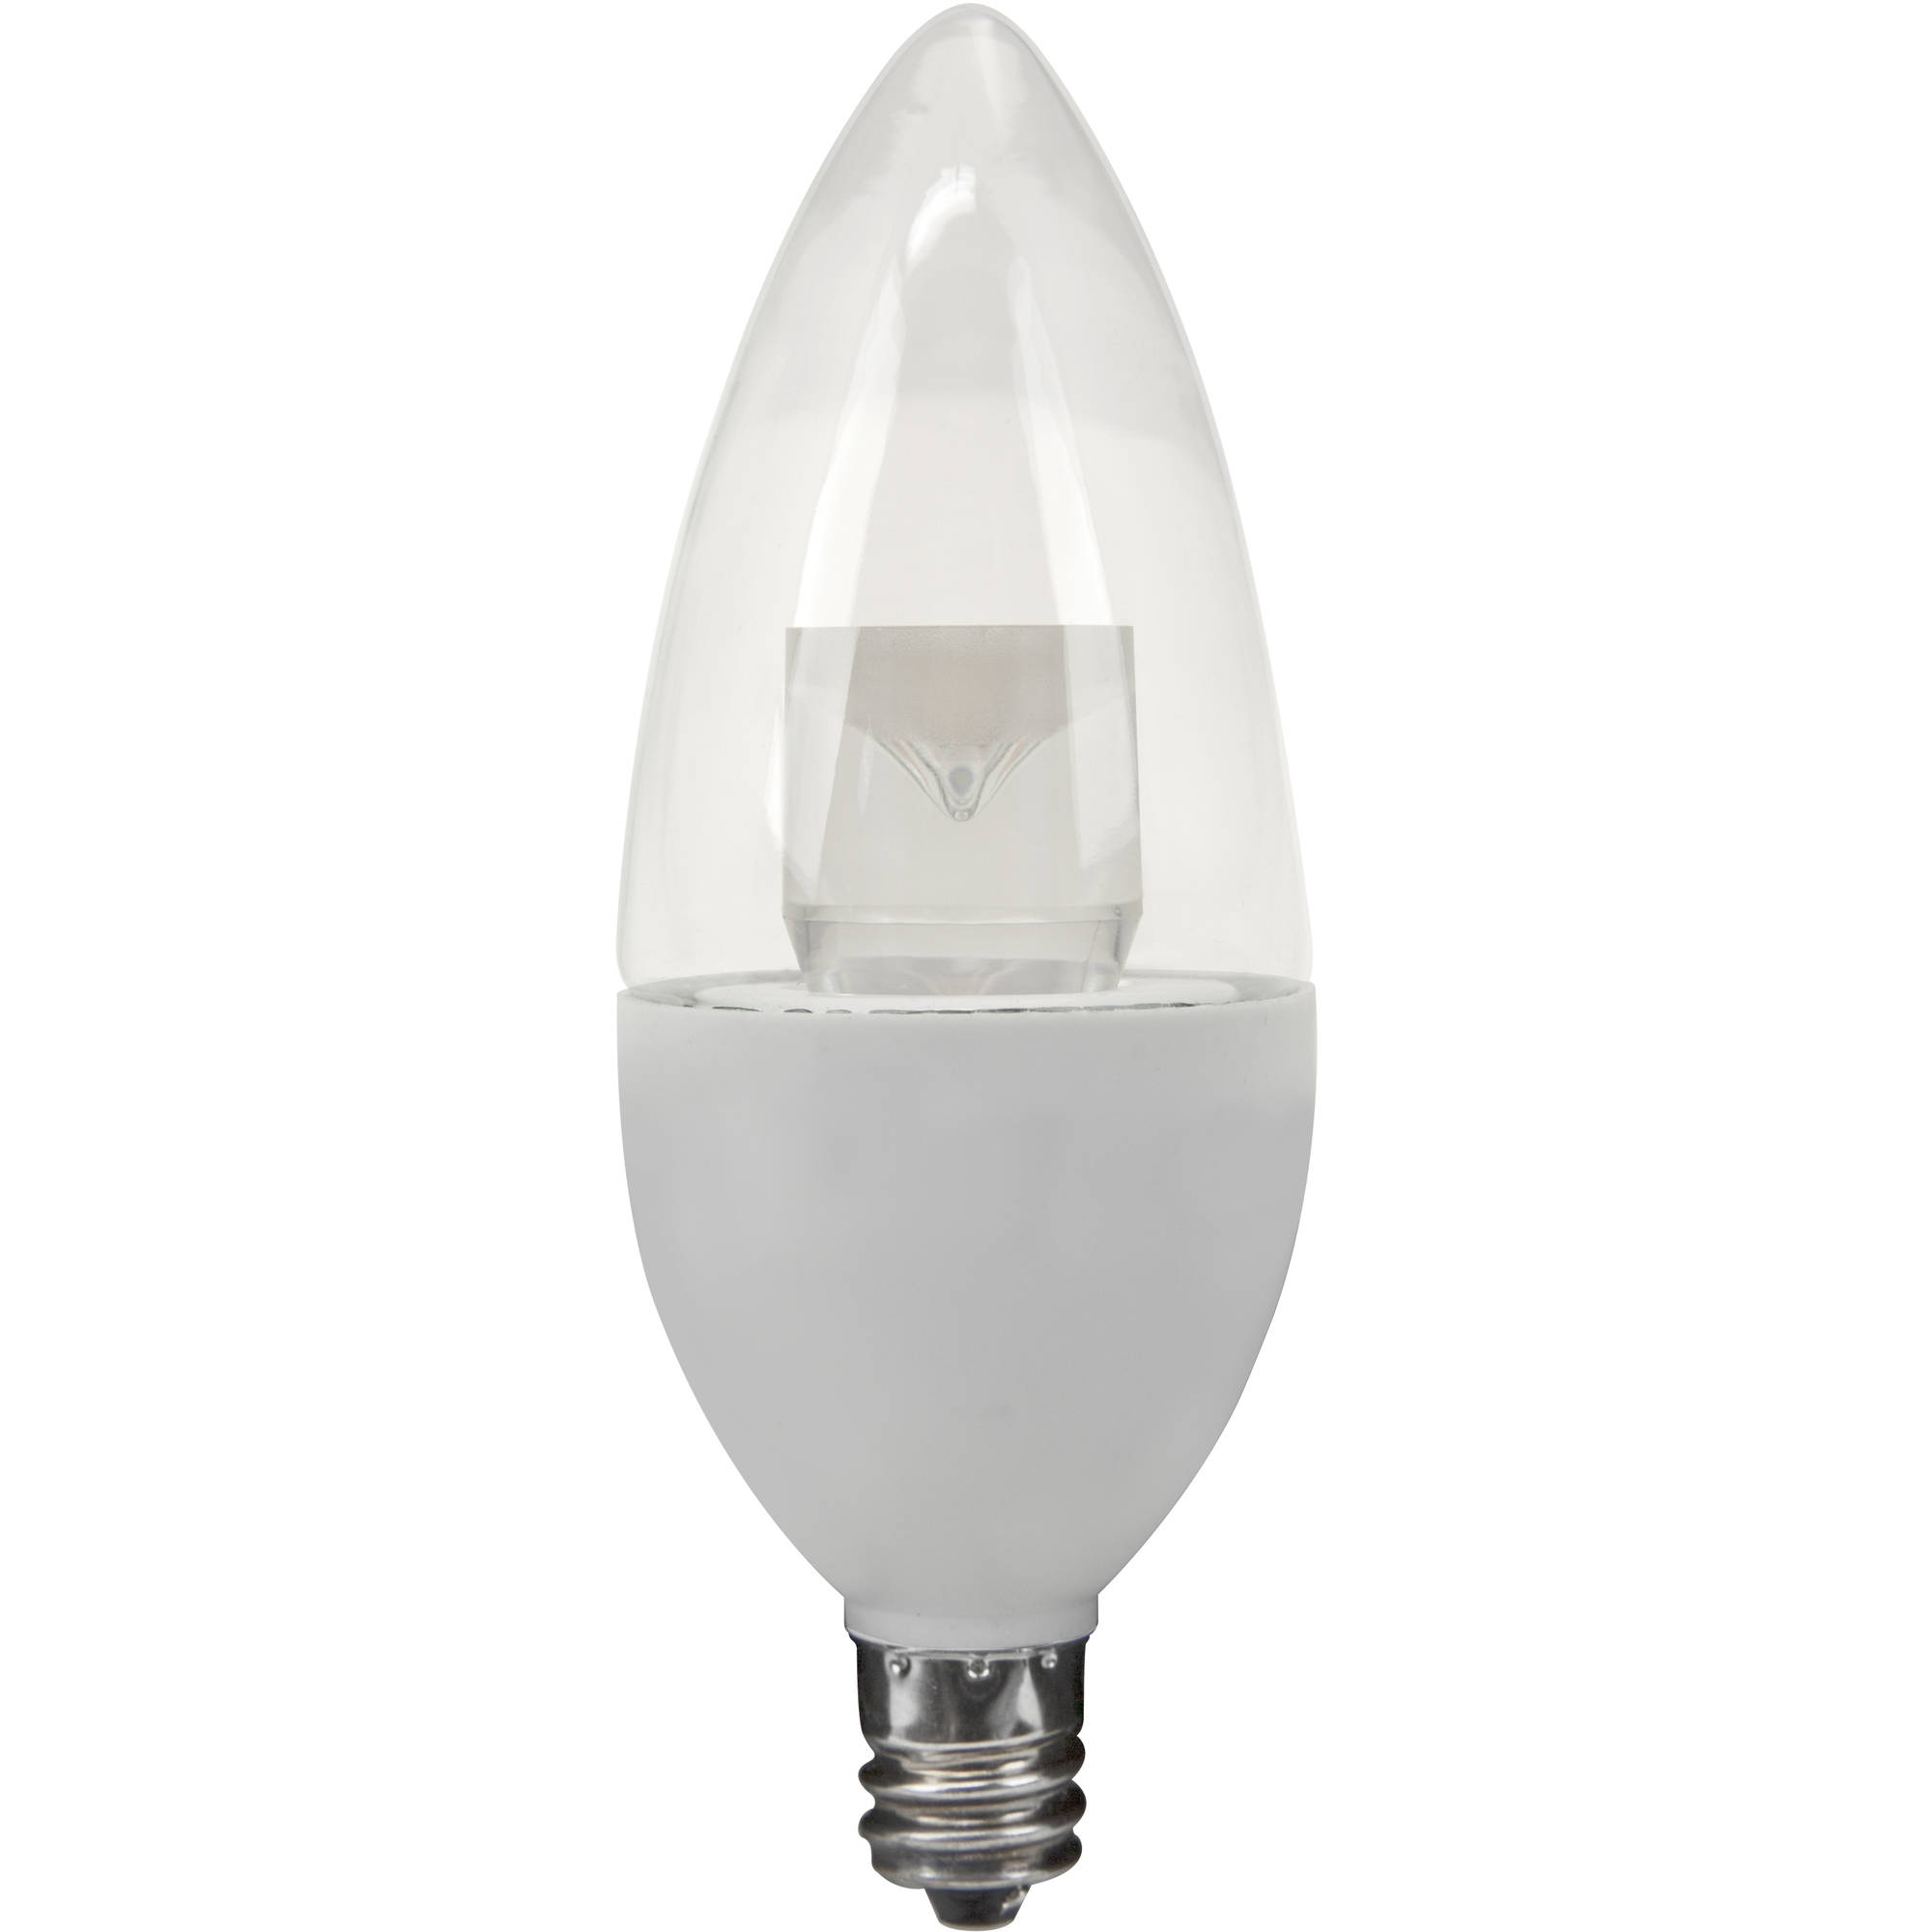 Great Value LED Light Bulb, 3W (25W Equivalent) B11 Decorative Lamp E12 Candelabra Base, Non-Dimmable, Daylight, 1-Pack - image 2 of 5